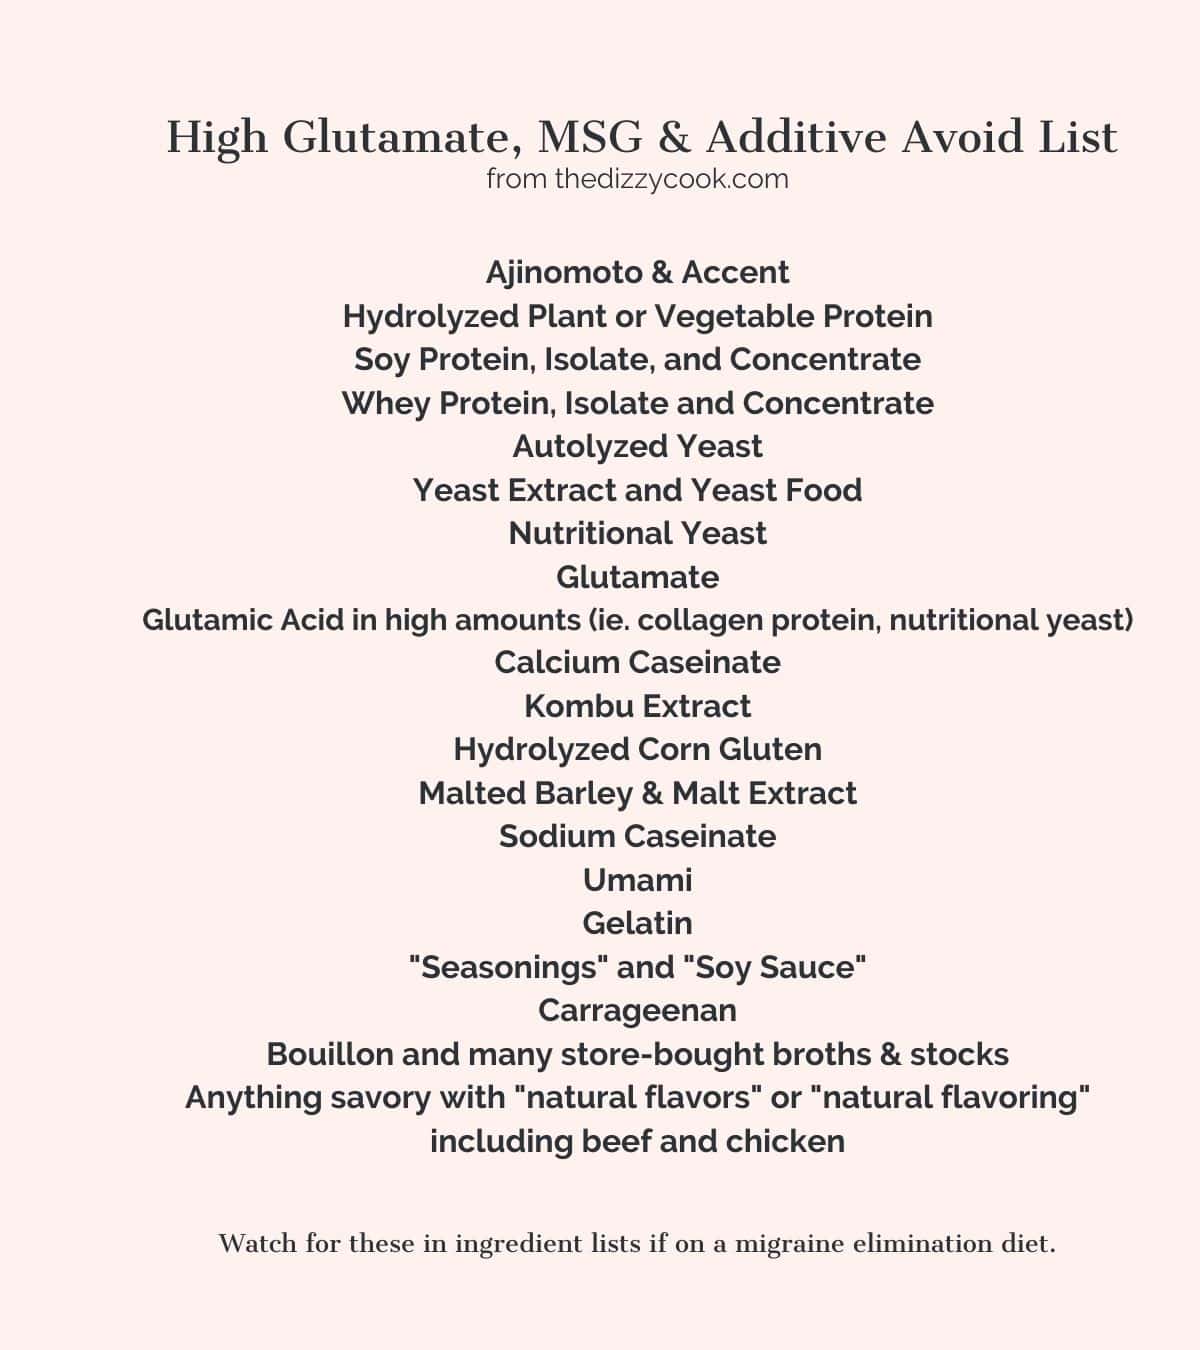 A list of common ingredients to avoid that are high glutamate, msg, and additives on the heal your headache diet.